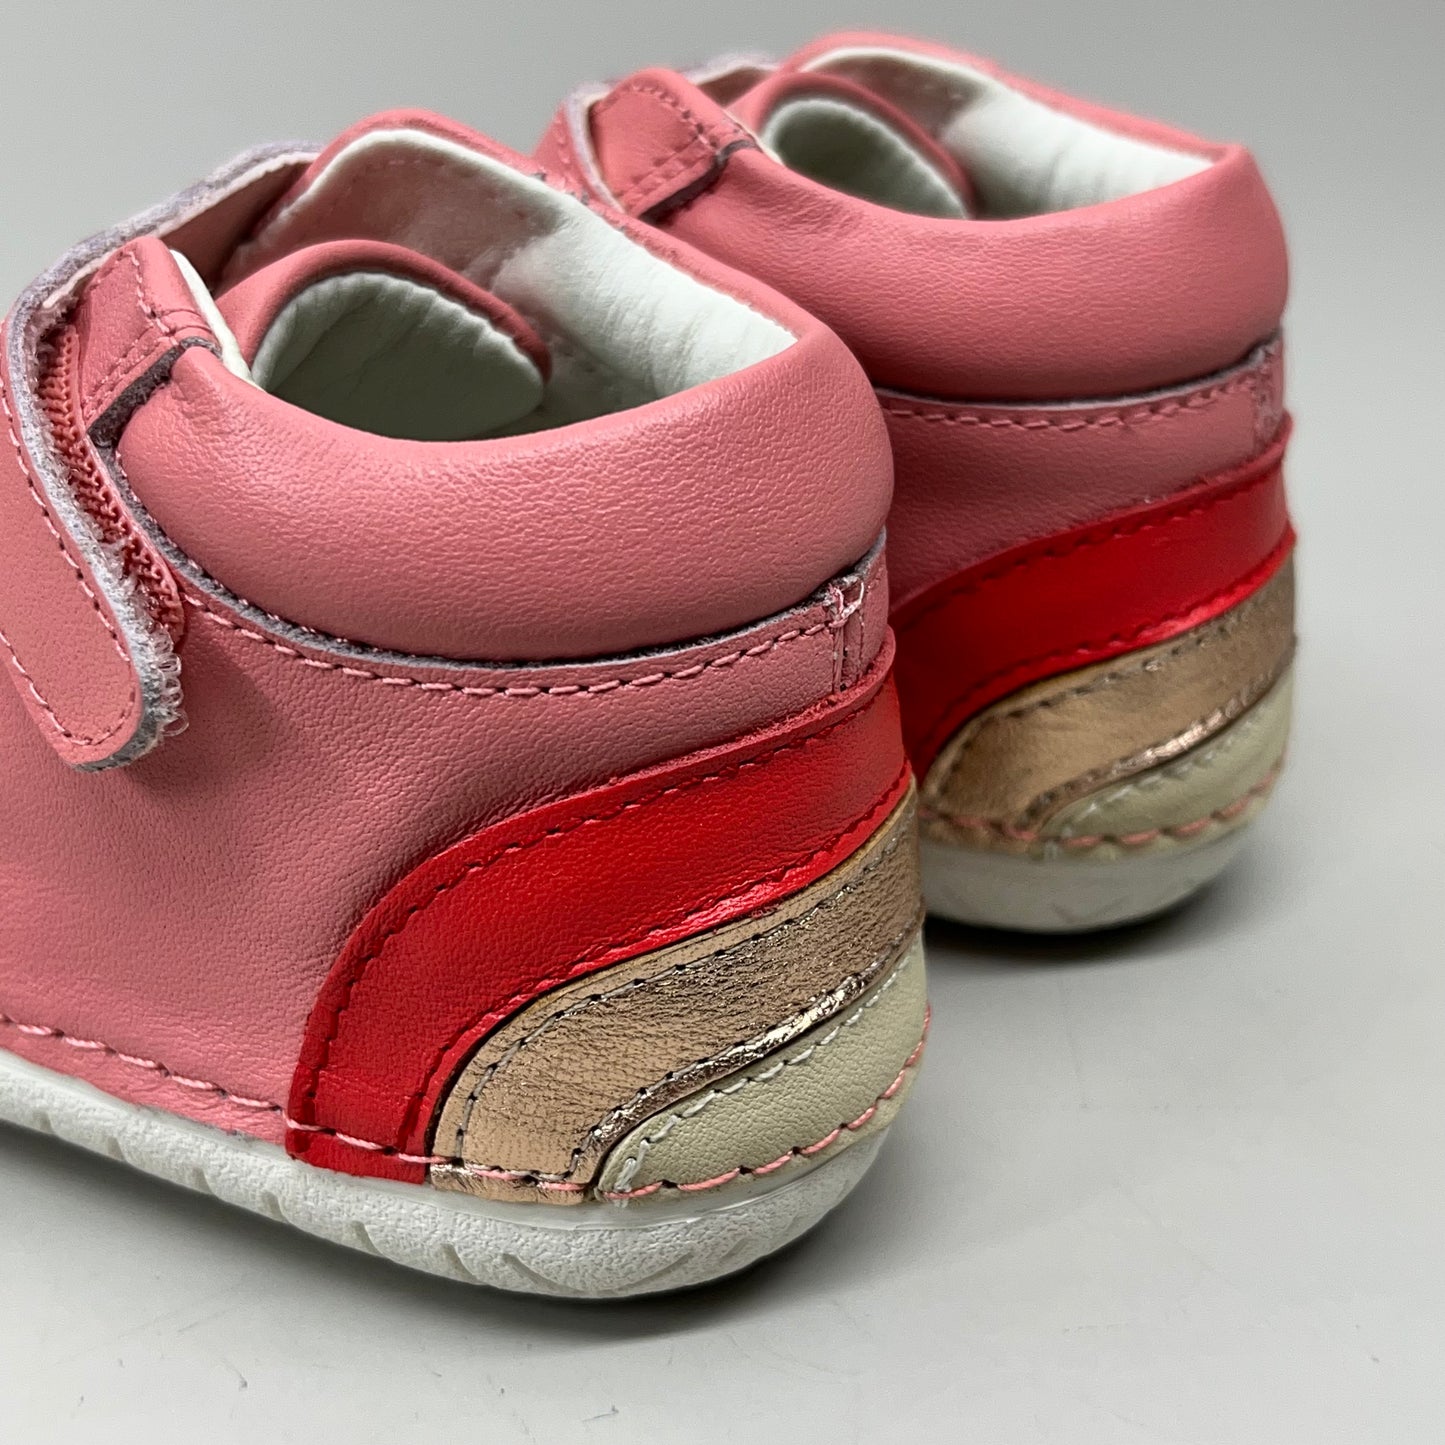 OLD SOLES Baby Rainbow Champster Leather Shoe Sz 22 US 6 Rossini/Red/Copper/Cream #4091